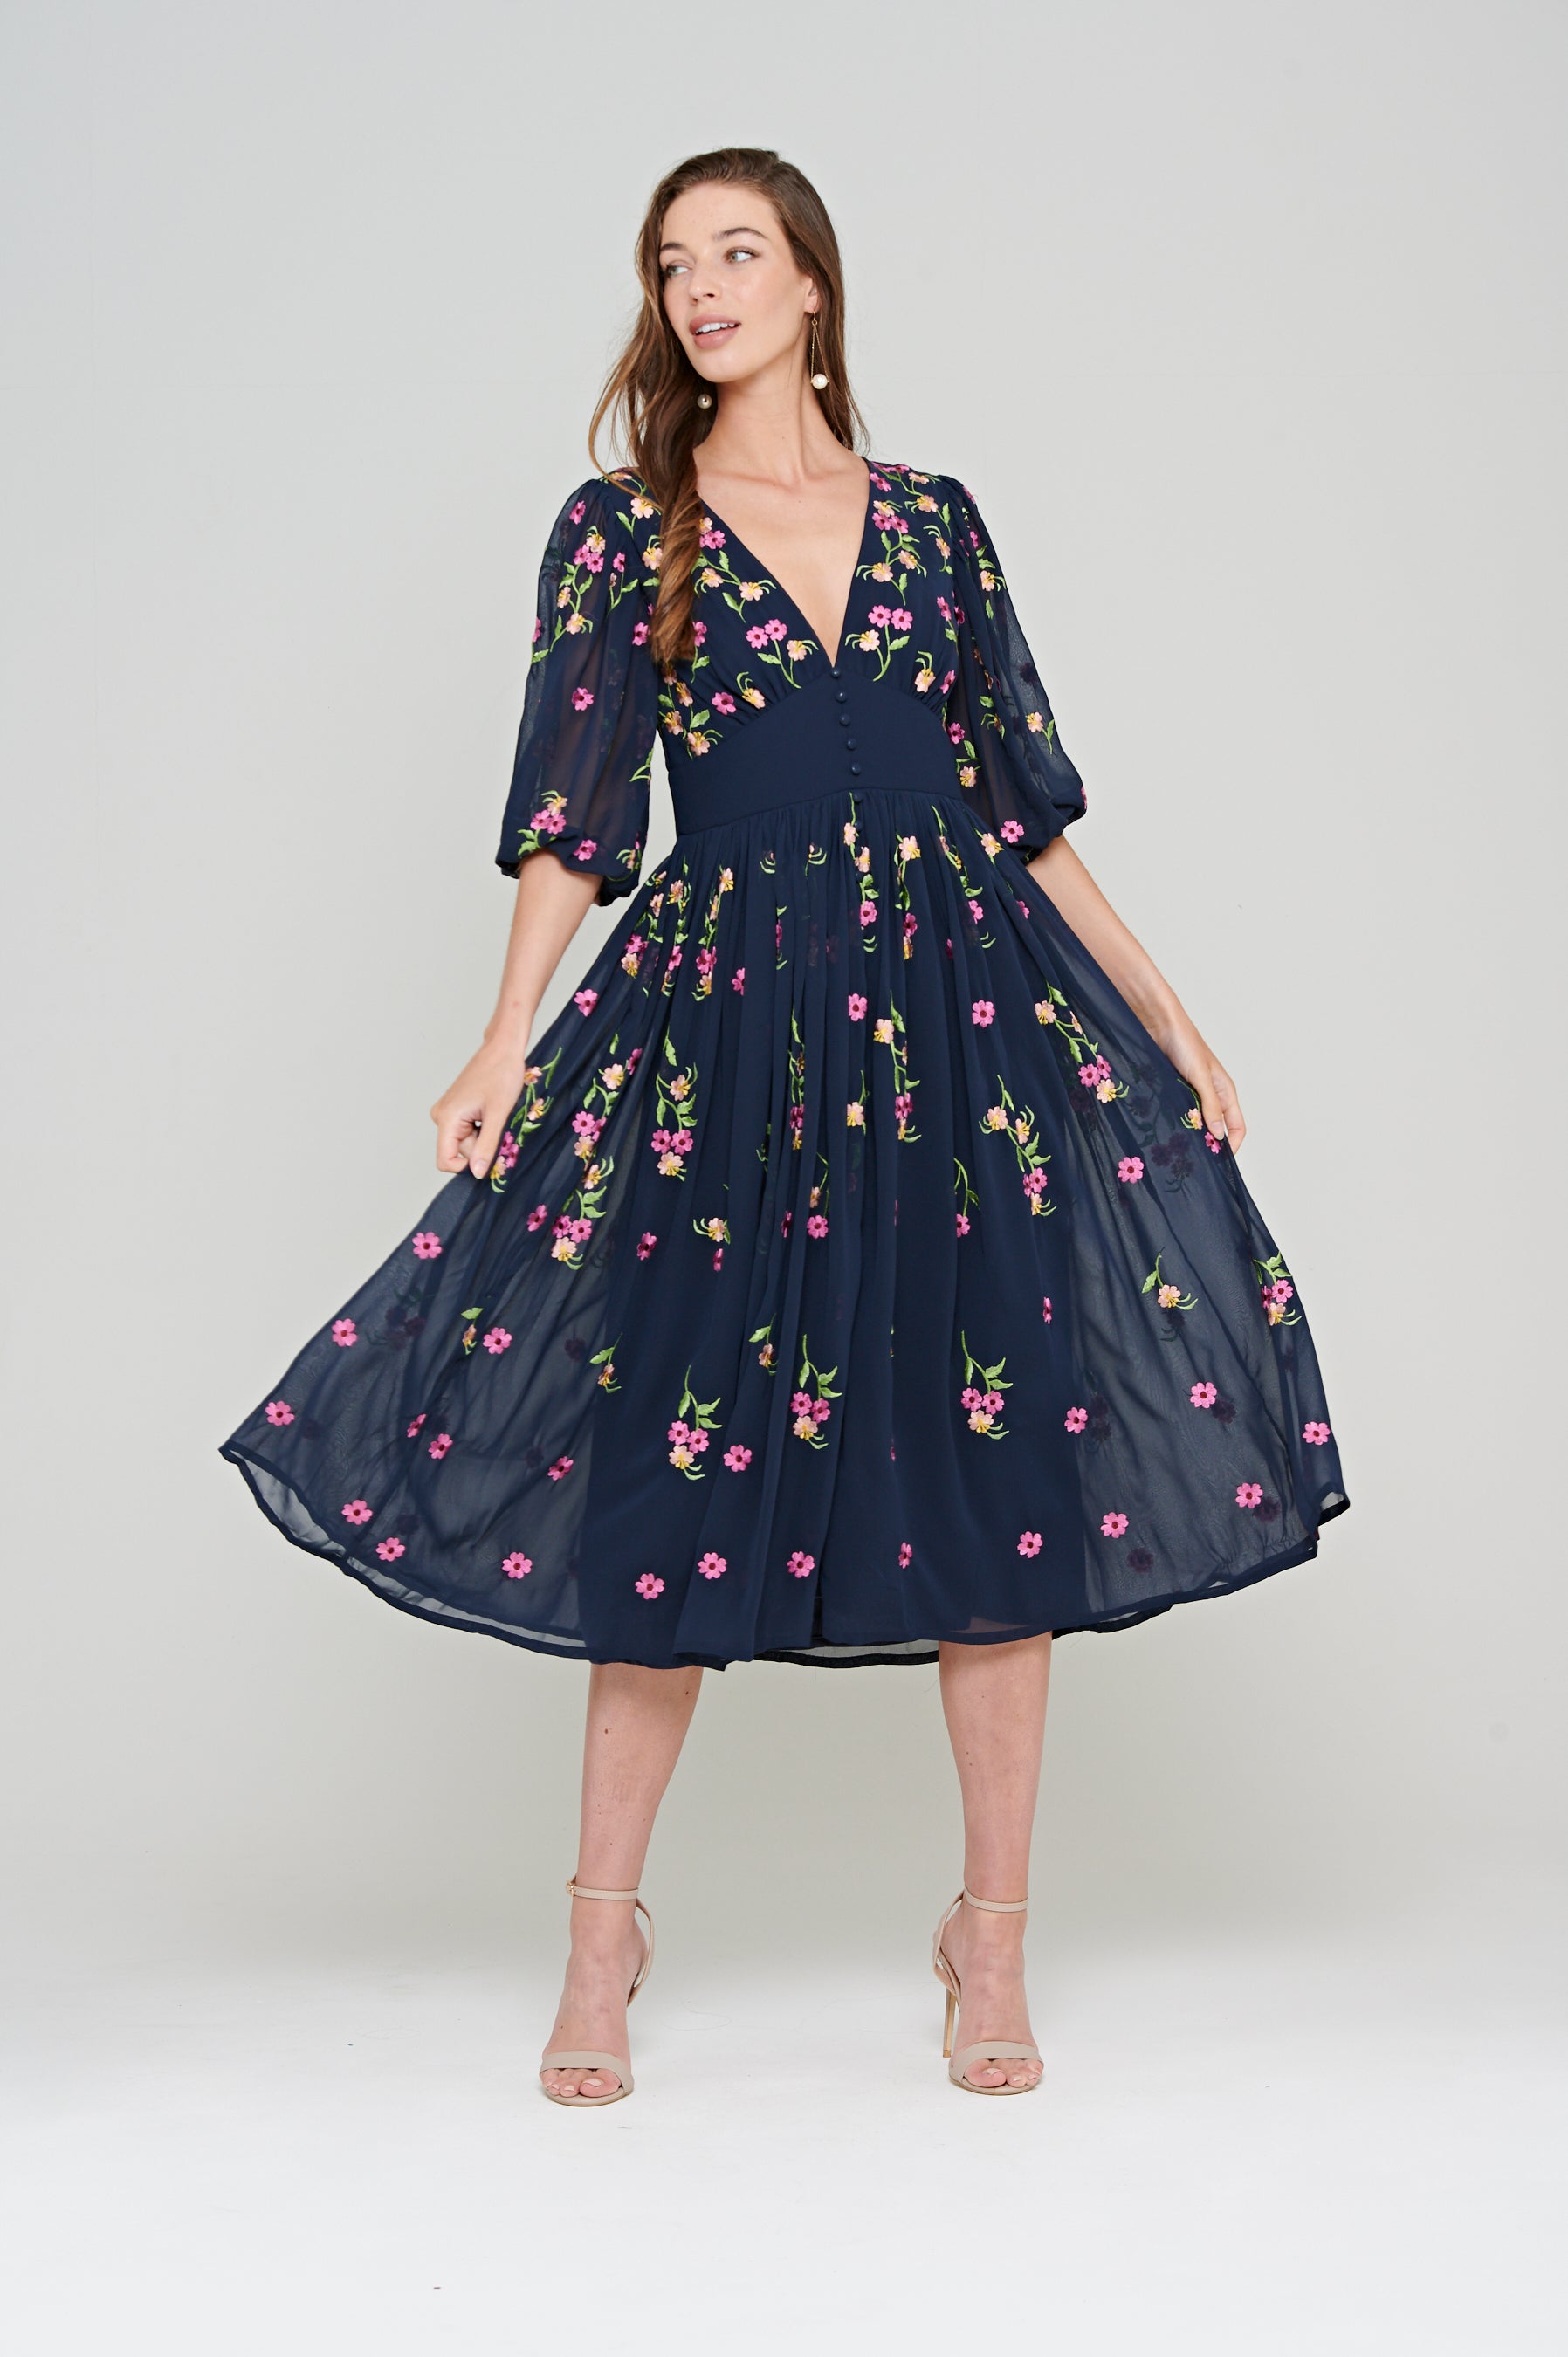 Veronne Floral Embroidered Dress – Frock and Frill